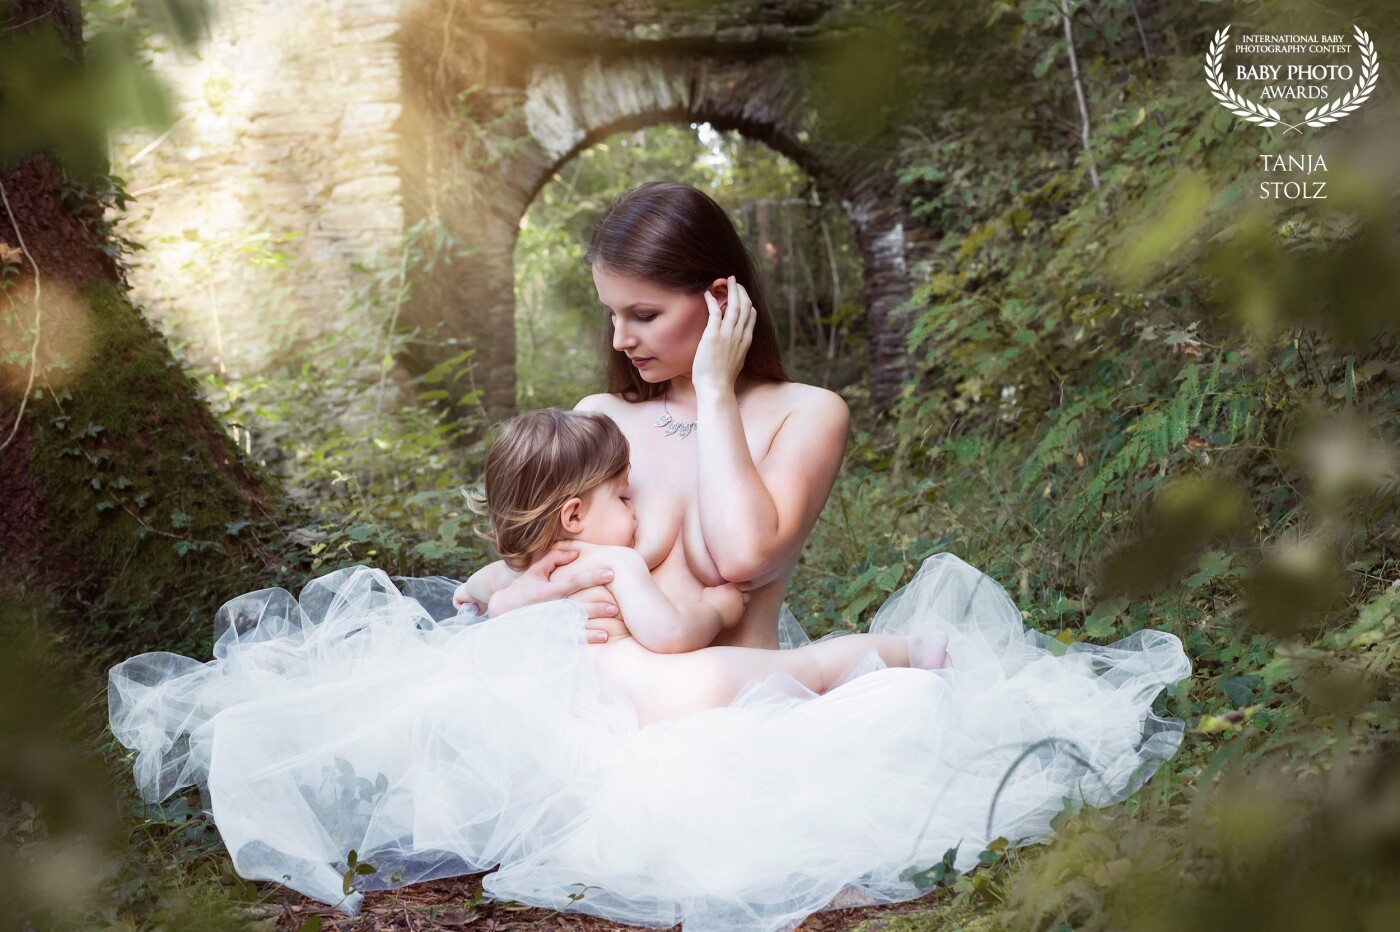 This is where my breastfeeding photo journey all began: my very first breastfeeding mom and her sweet child. We went outdoors into the forest, searching for a magical place and found this old ruins of an ancient castle. A gorgeous scene for a gorgeous woman. From this time on, I knew that I wanted to capture moments like this for all my clients and became known for my breastfeeding pictures. Thank you so much!